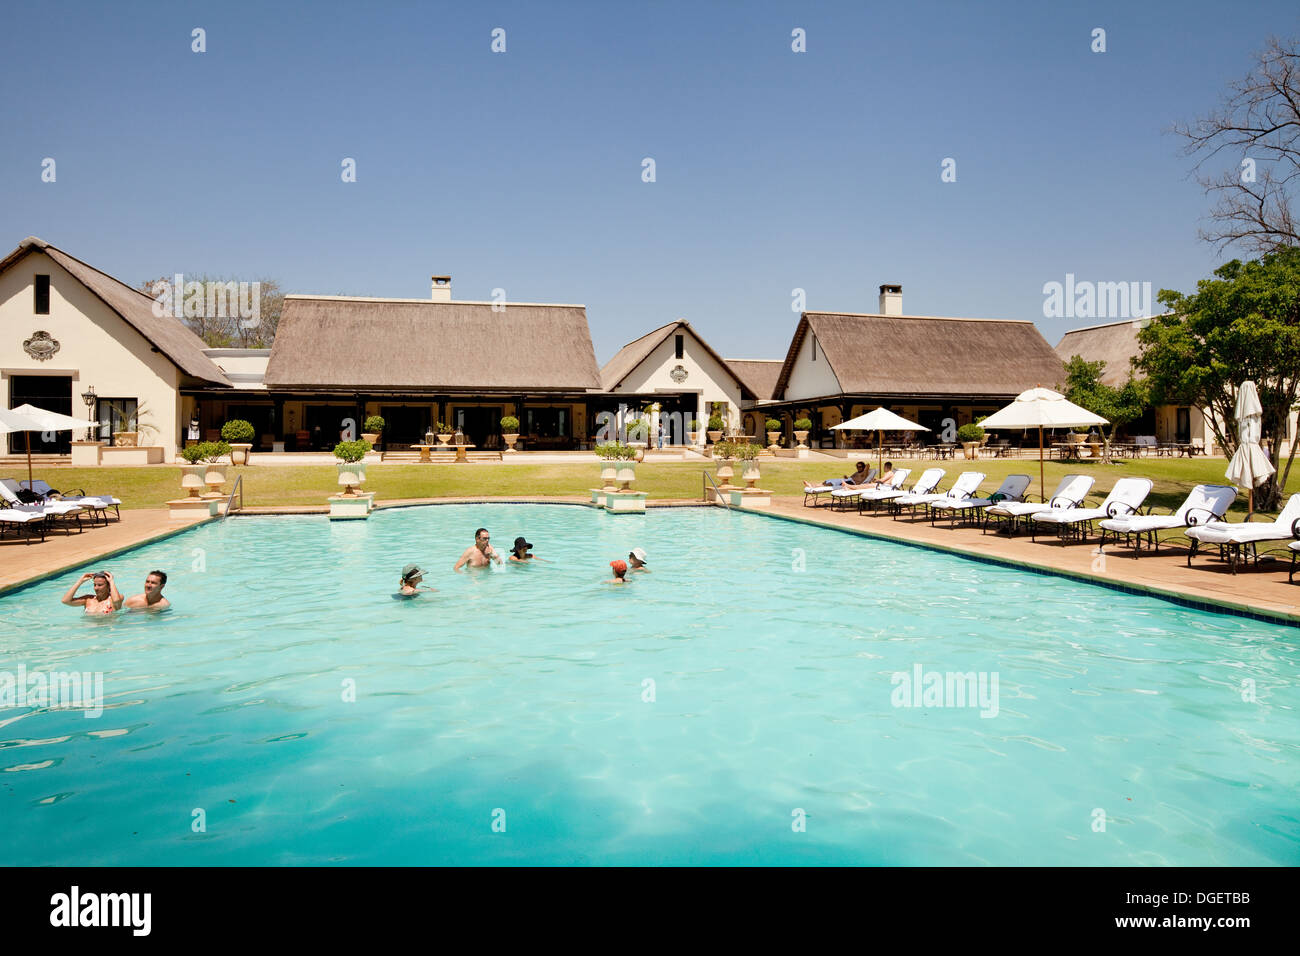 Africa hotel - The luxury Royal Livingstone Hotel and swimming pool,  Victoria Falls, Zambia Africa Stock Photo